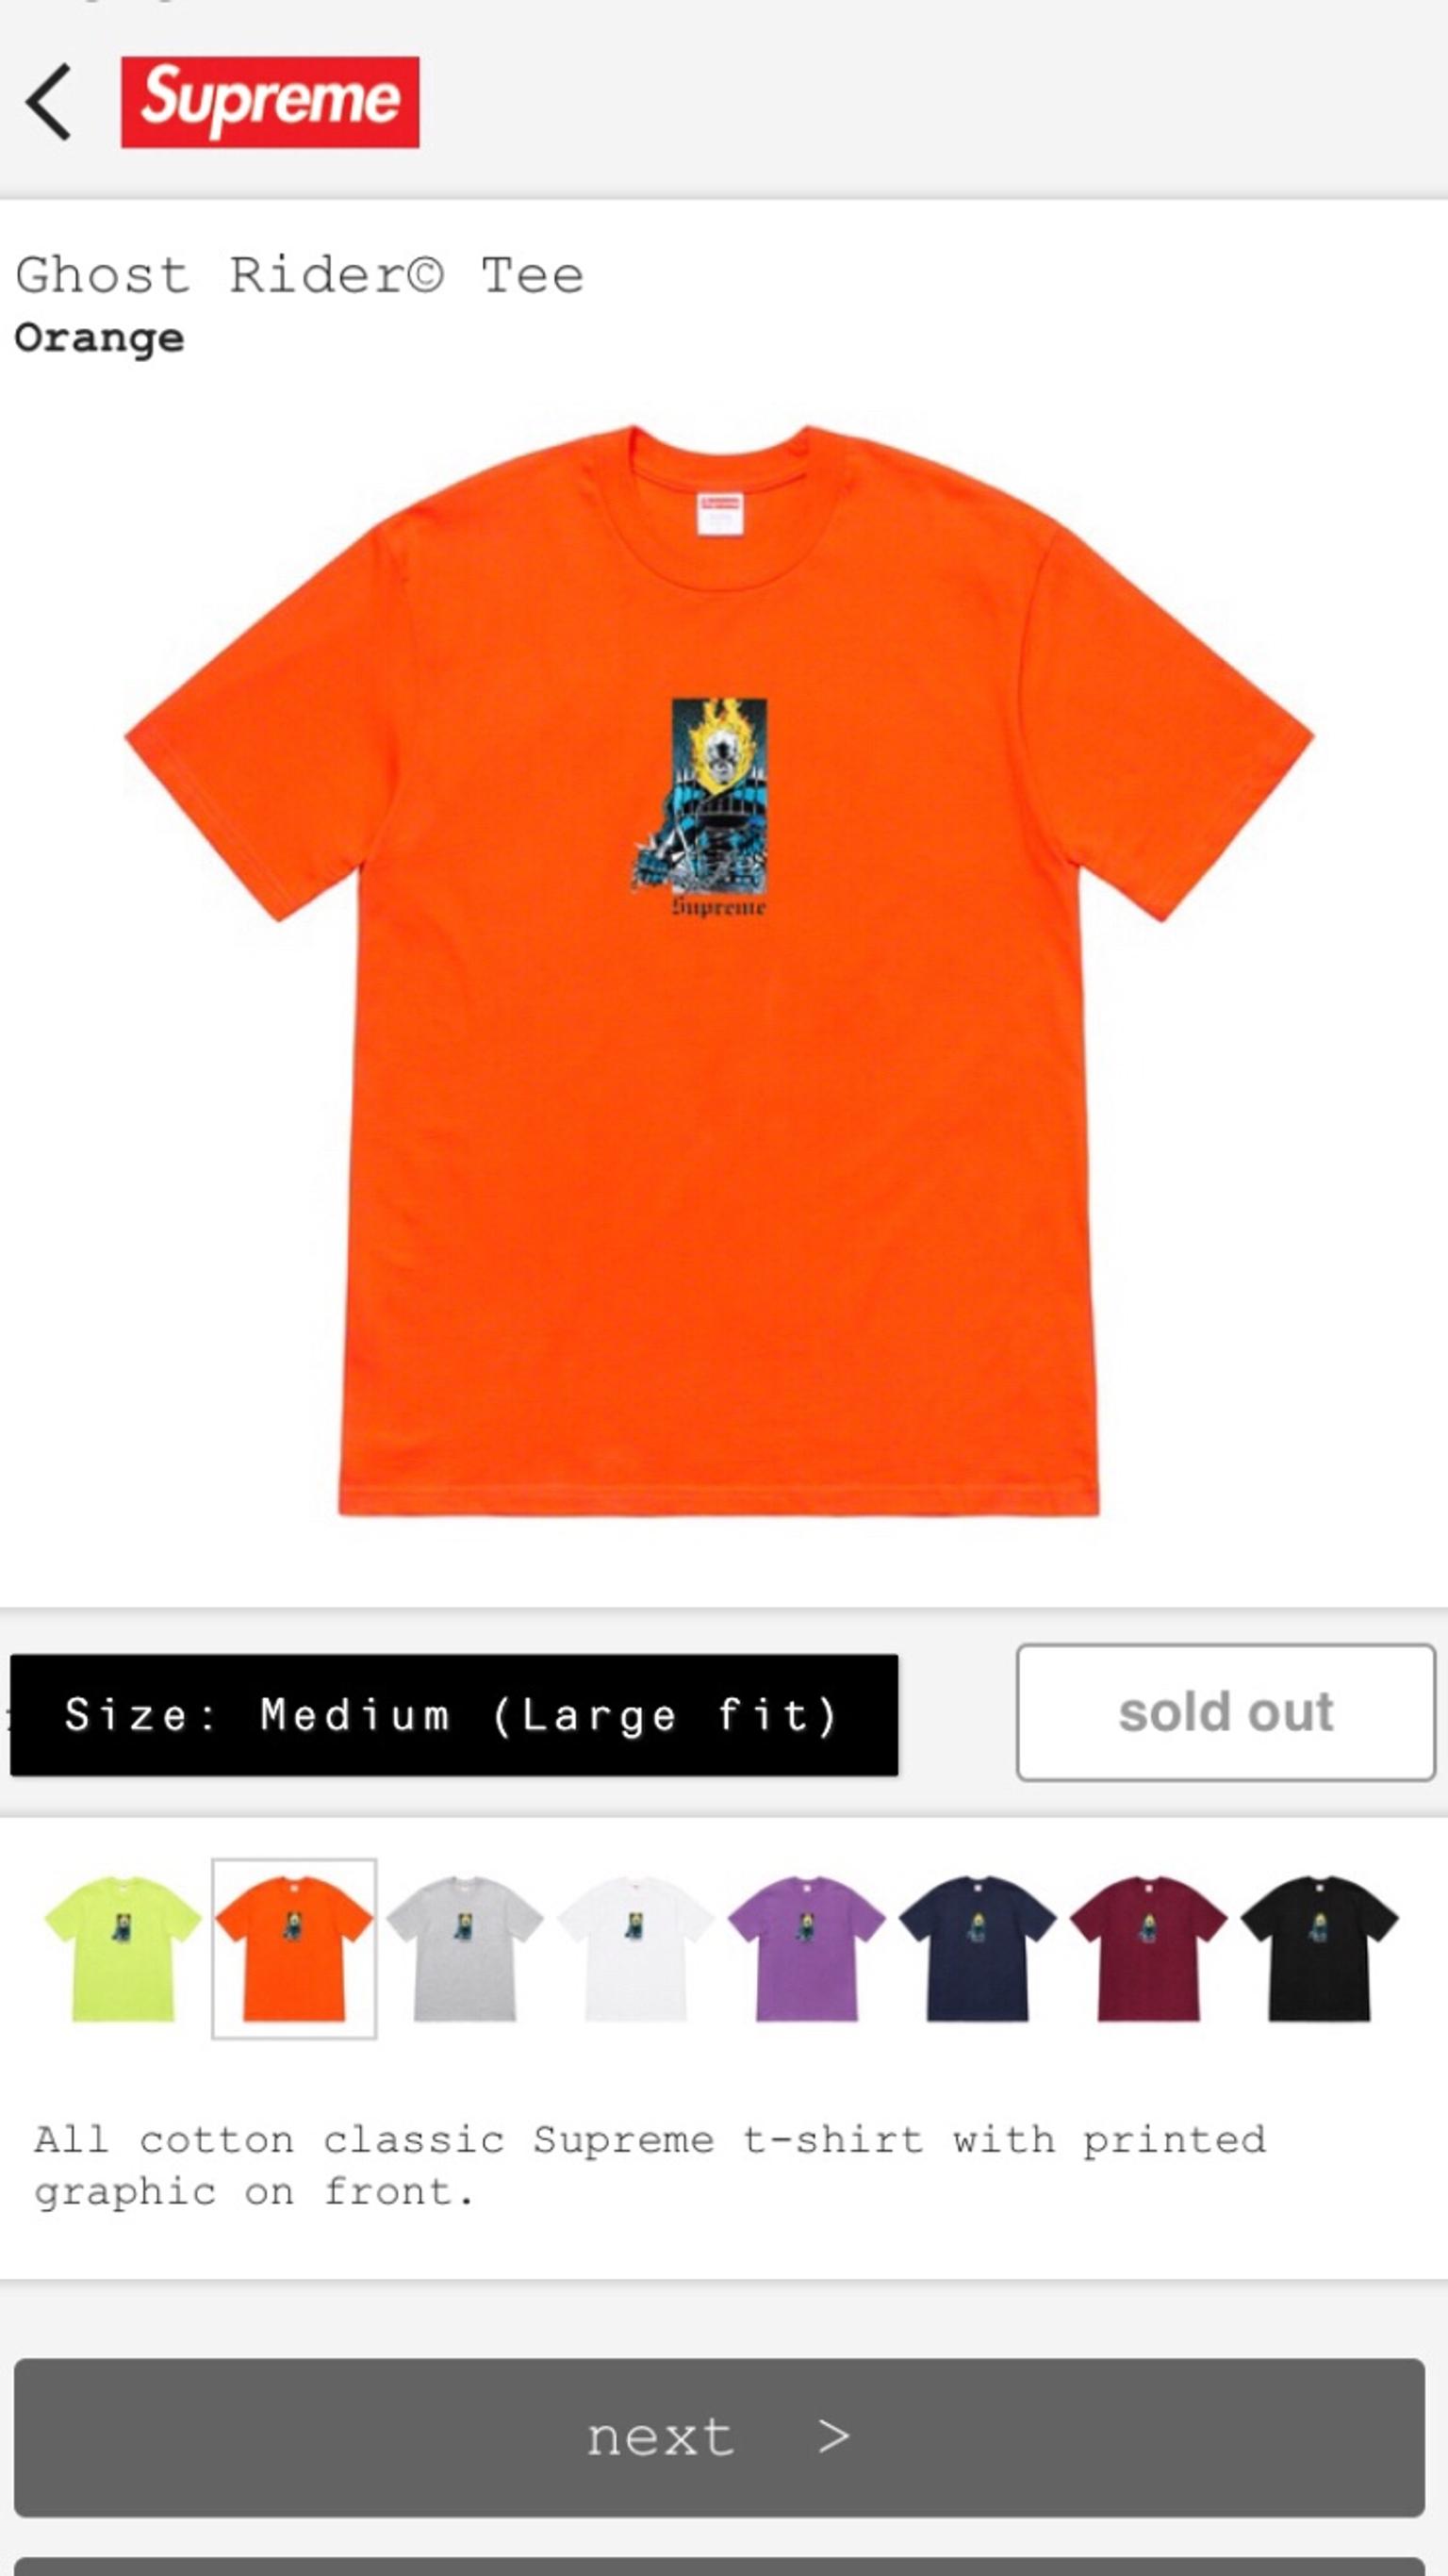 Supreme SS19 “Ghost Rider Tee” T-Shirt In E2 London For £100 00